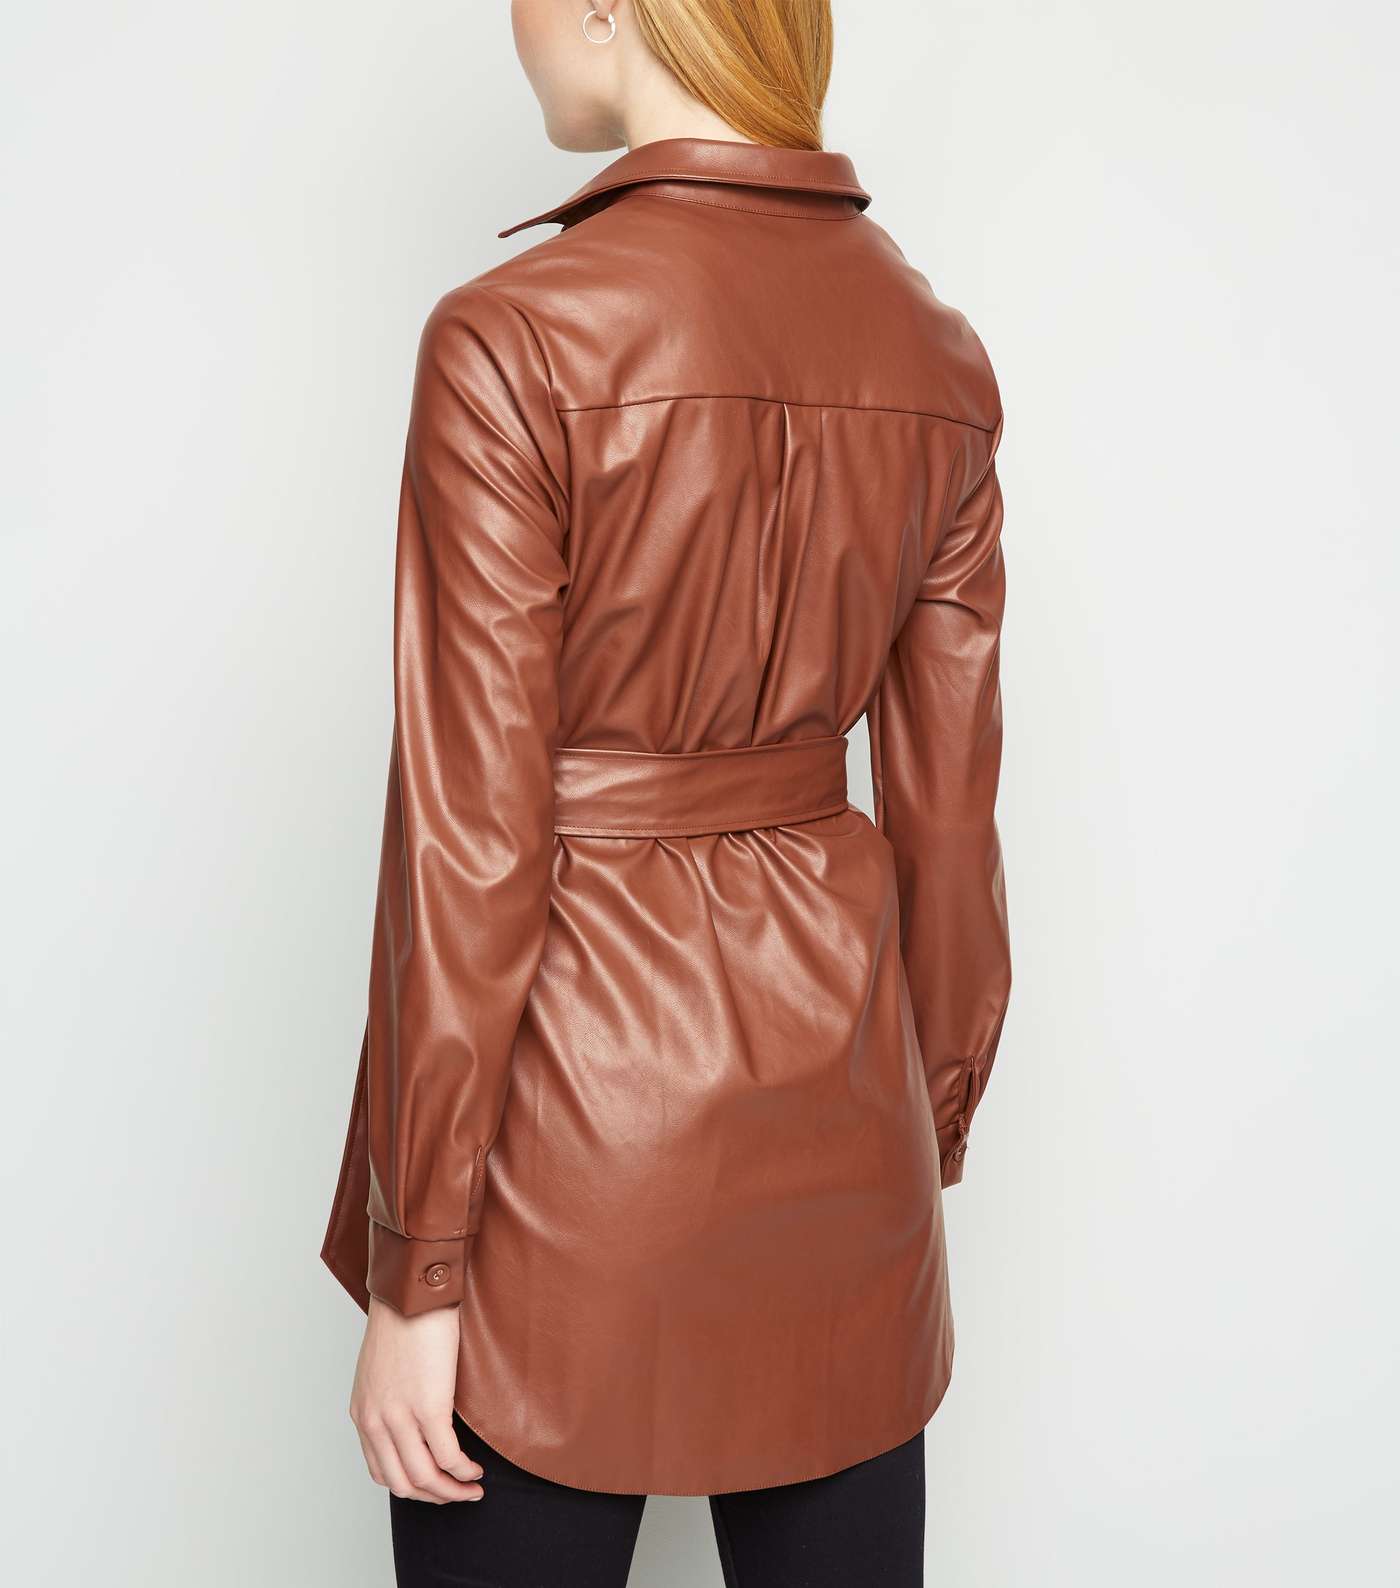 Tan Leather-Look Belted Shirt Image 3